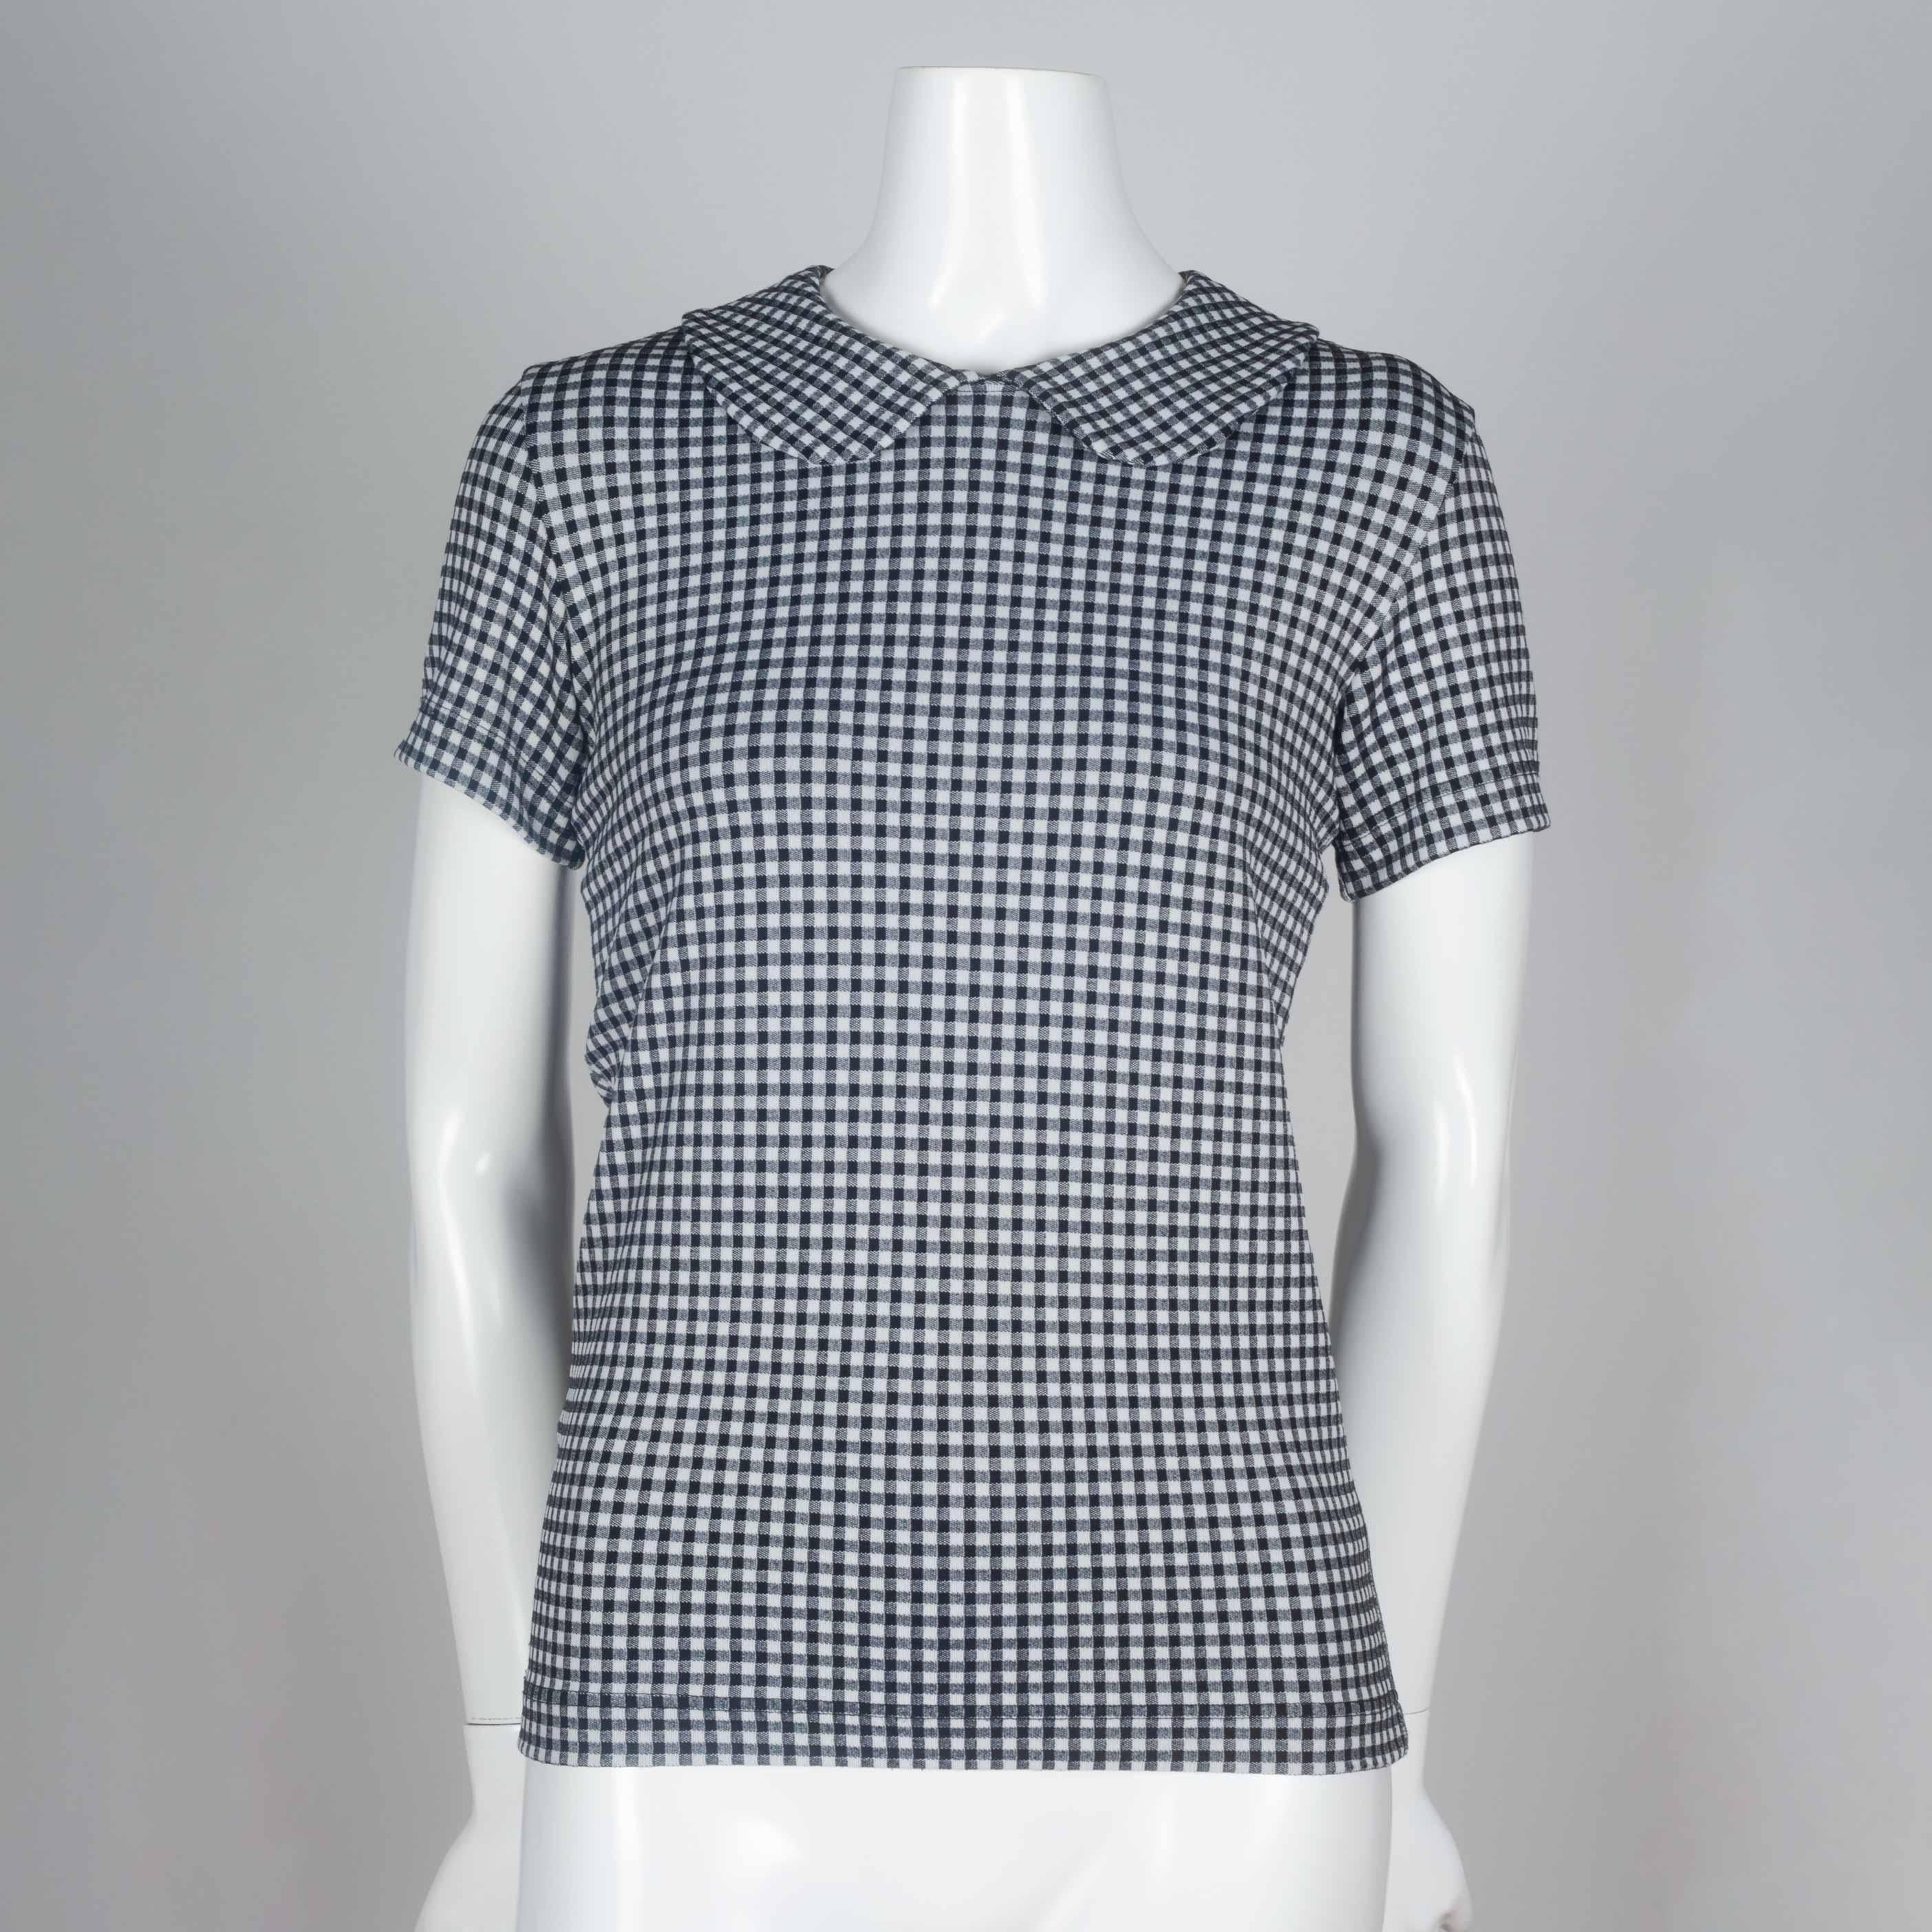 Comme des Garçons Robe de Chambre 1996 collared tee in black and white checkered fabric. 

YEAR: 1996
MARKED SIZE: No marked size
US WOMEN'S: XS
US MEN'S: XXS
FIT: Regular
CHEST: 14